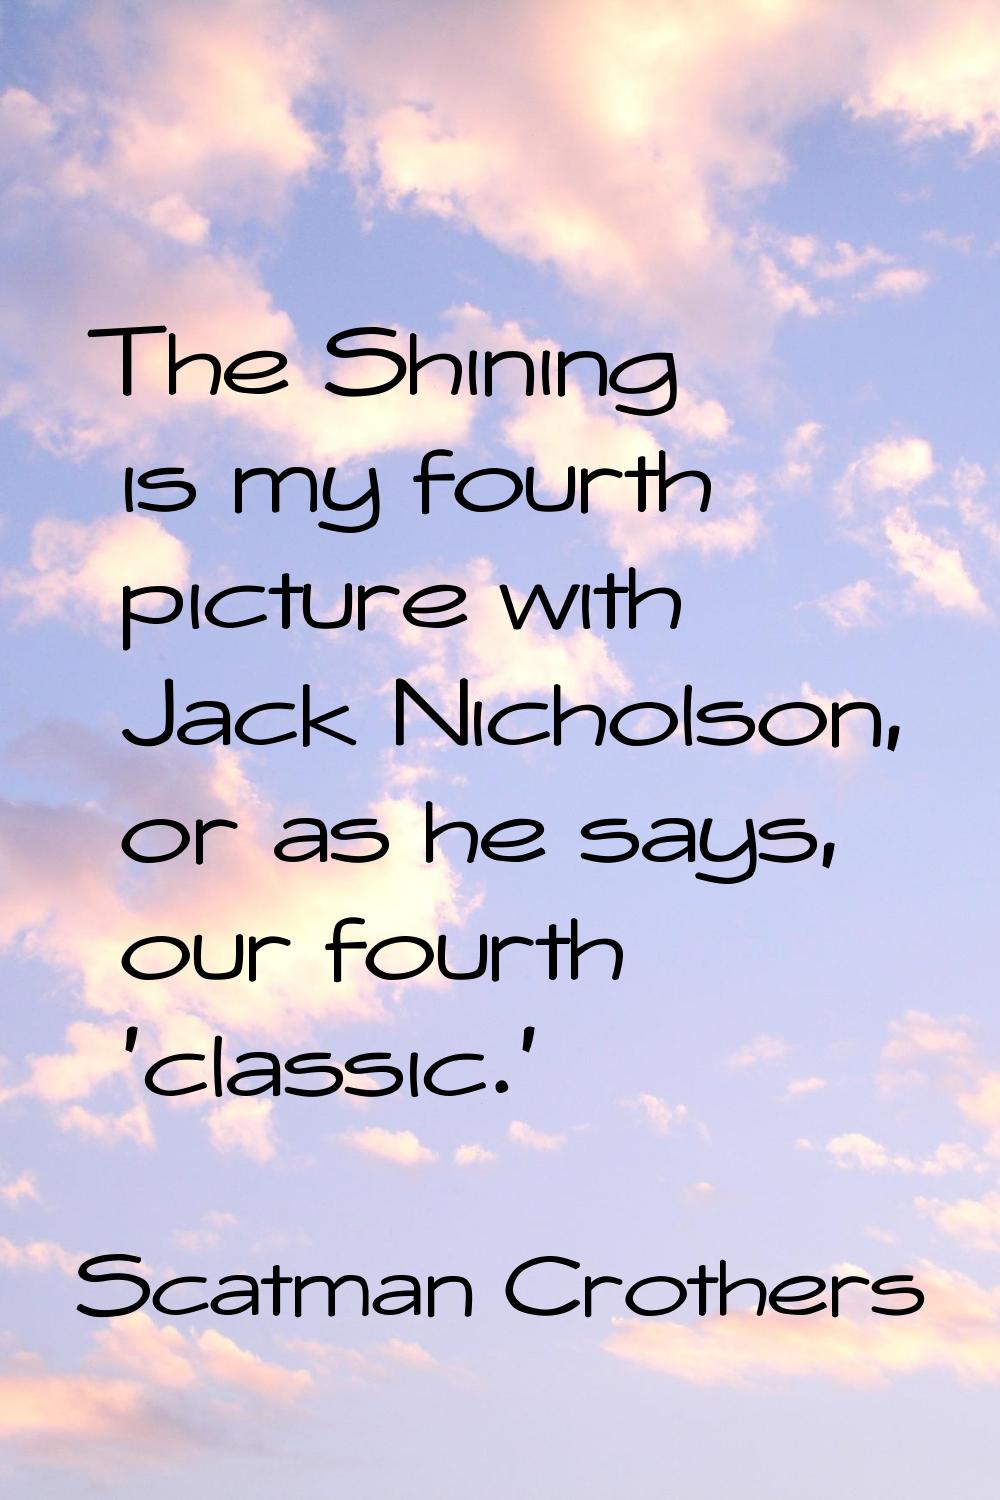 The Shining is my fourth picture with Jack Nicholson, or as he says, our fourth 'classic.'